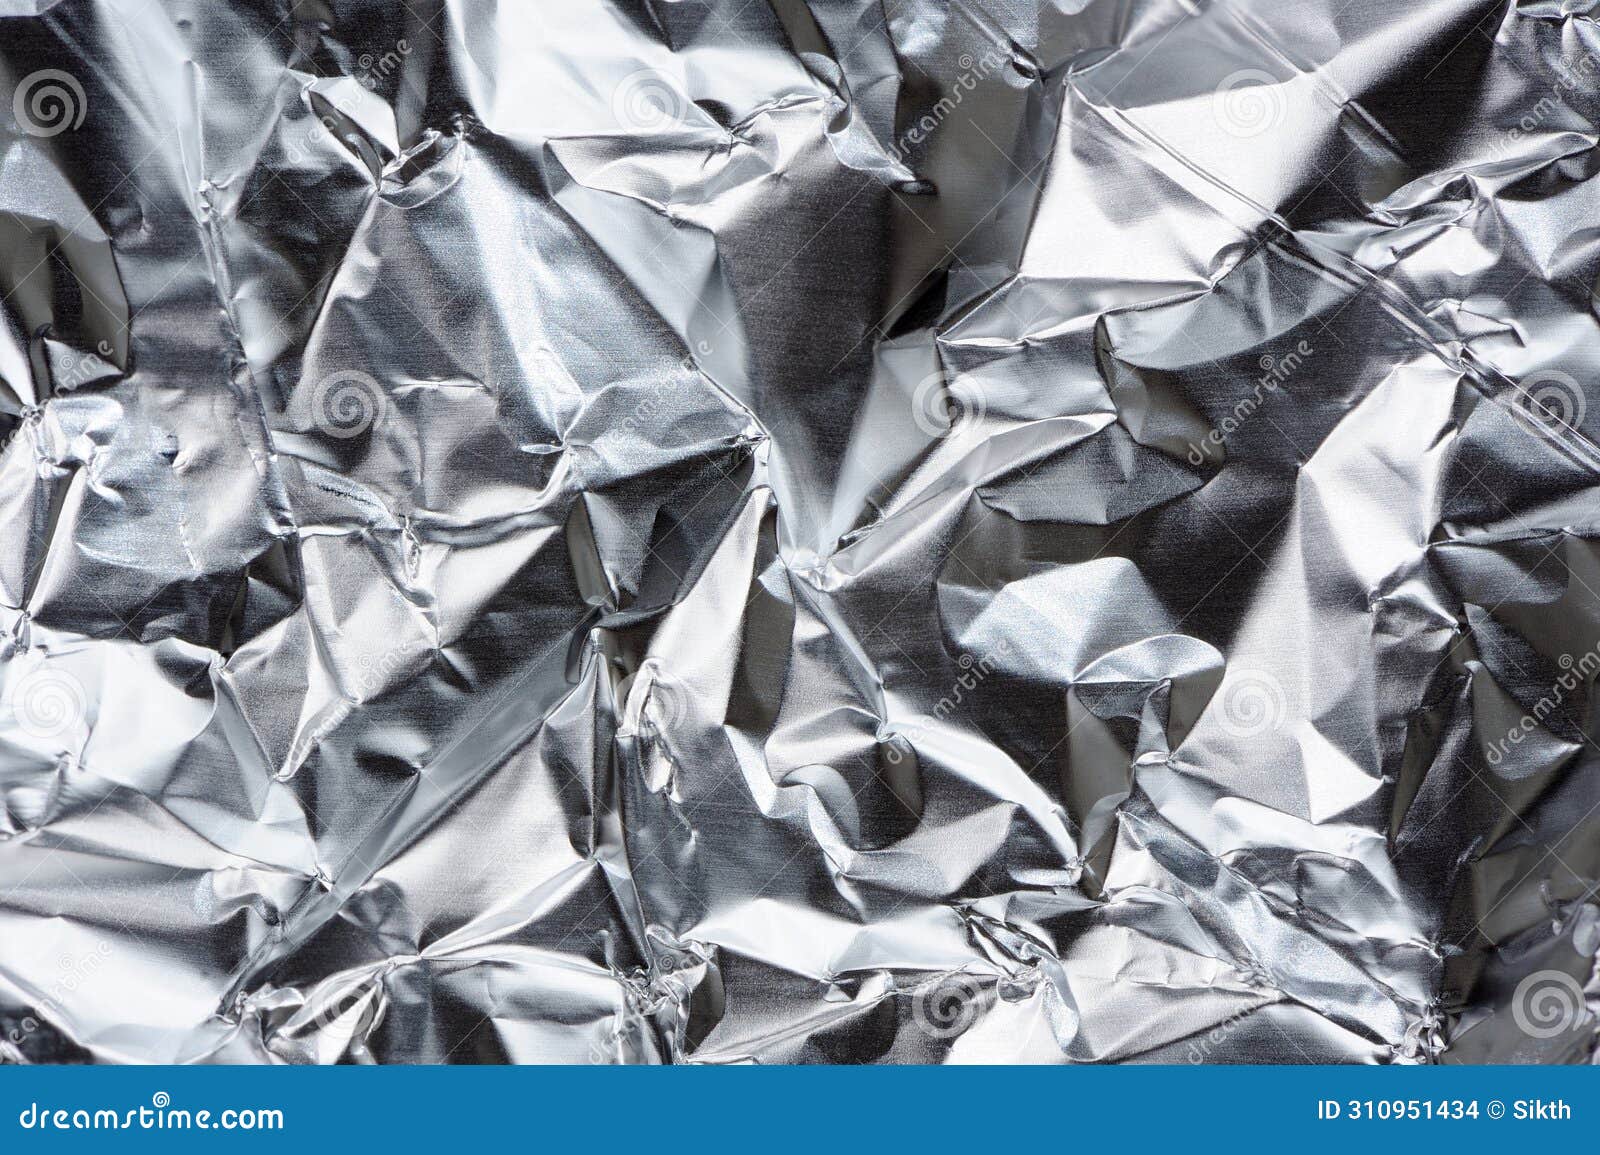 crumpled aluminum foil with folds and creases as background